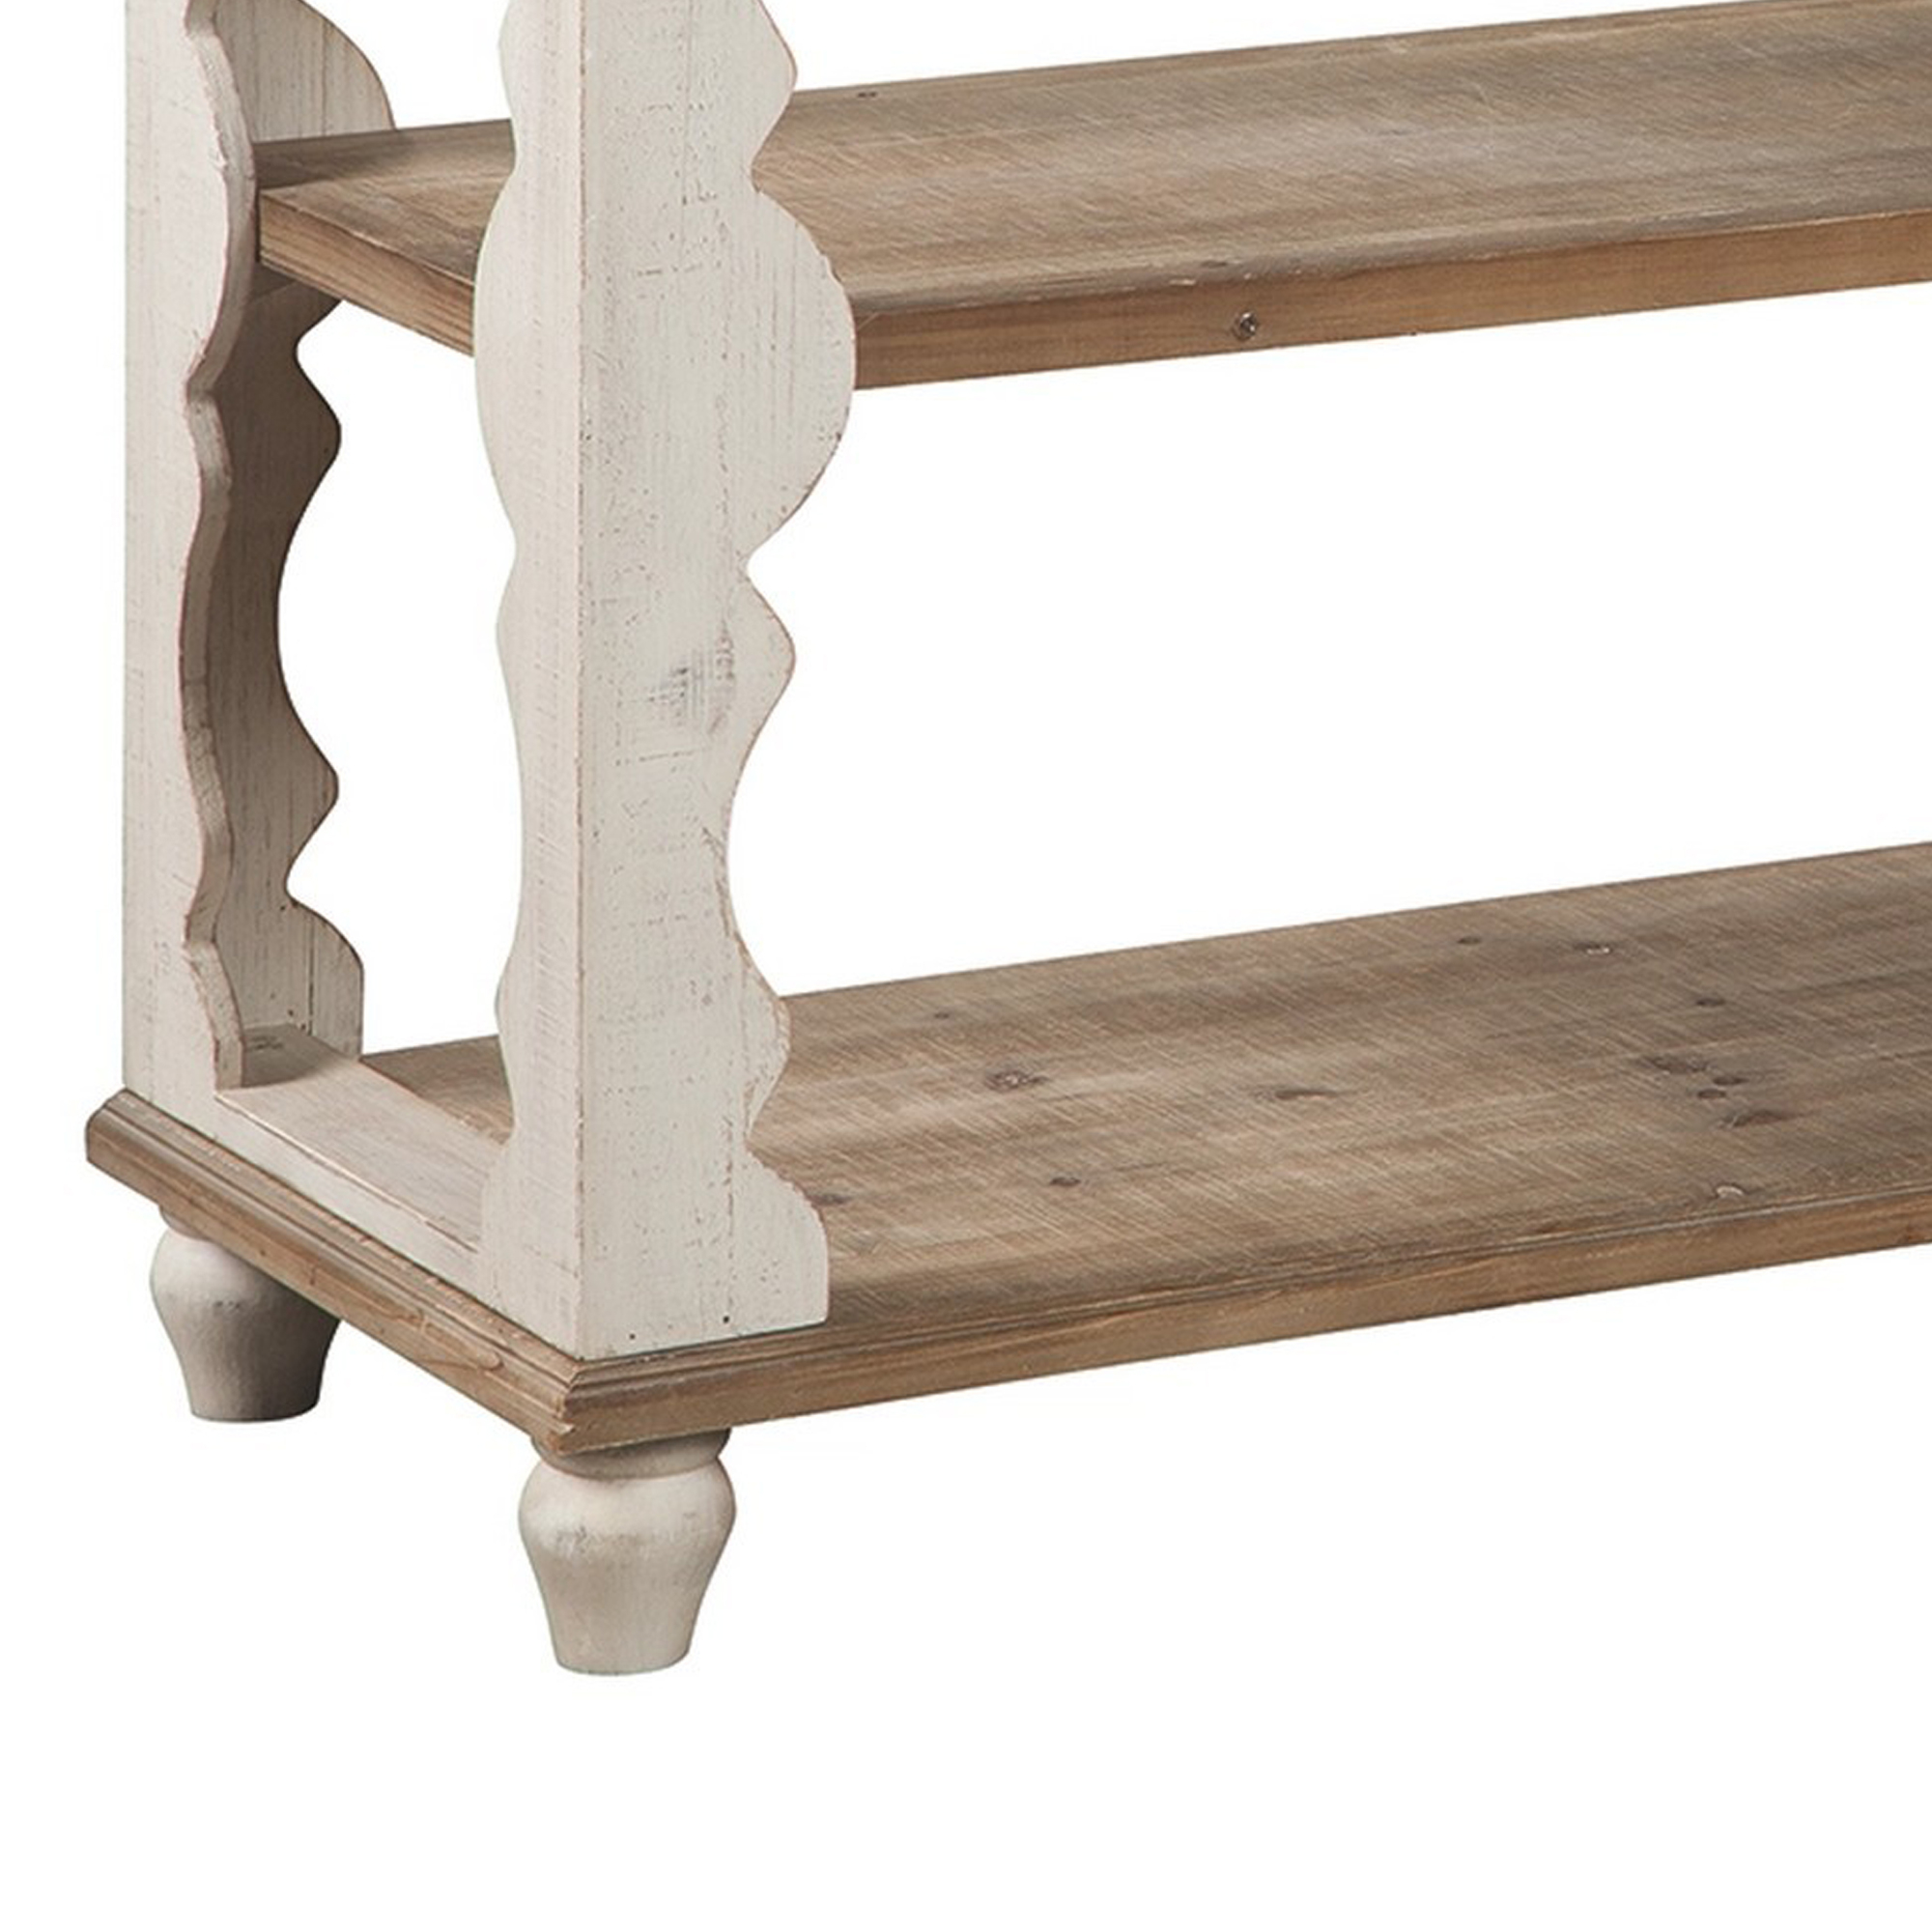 Traditional Style Console Sofa Table With Scalloped Design, White And Brown- Saltoro Sherpi